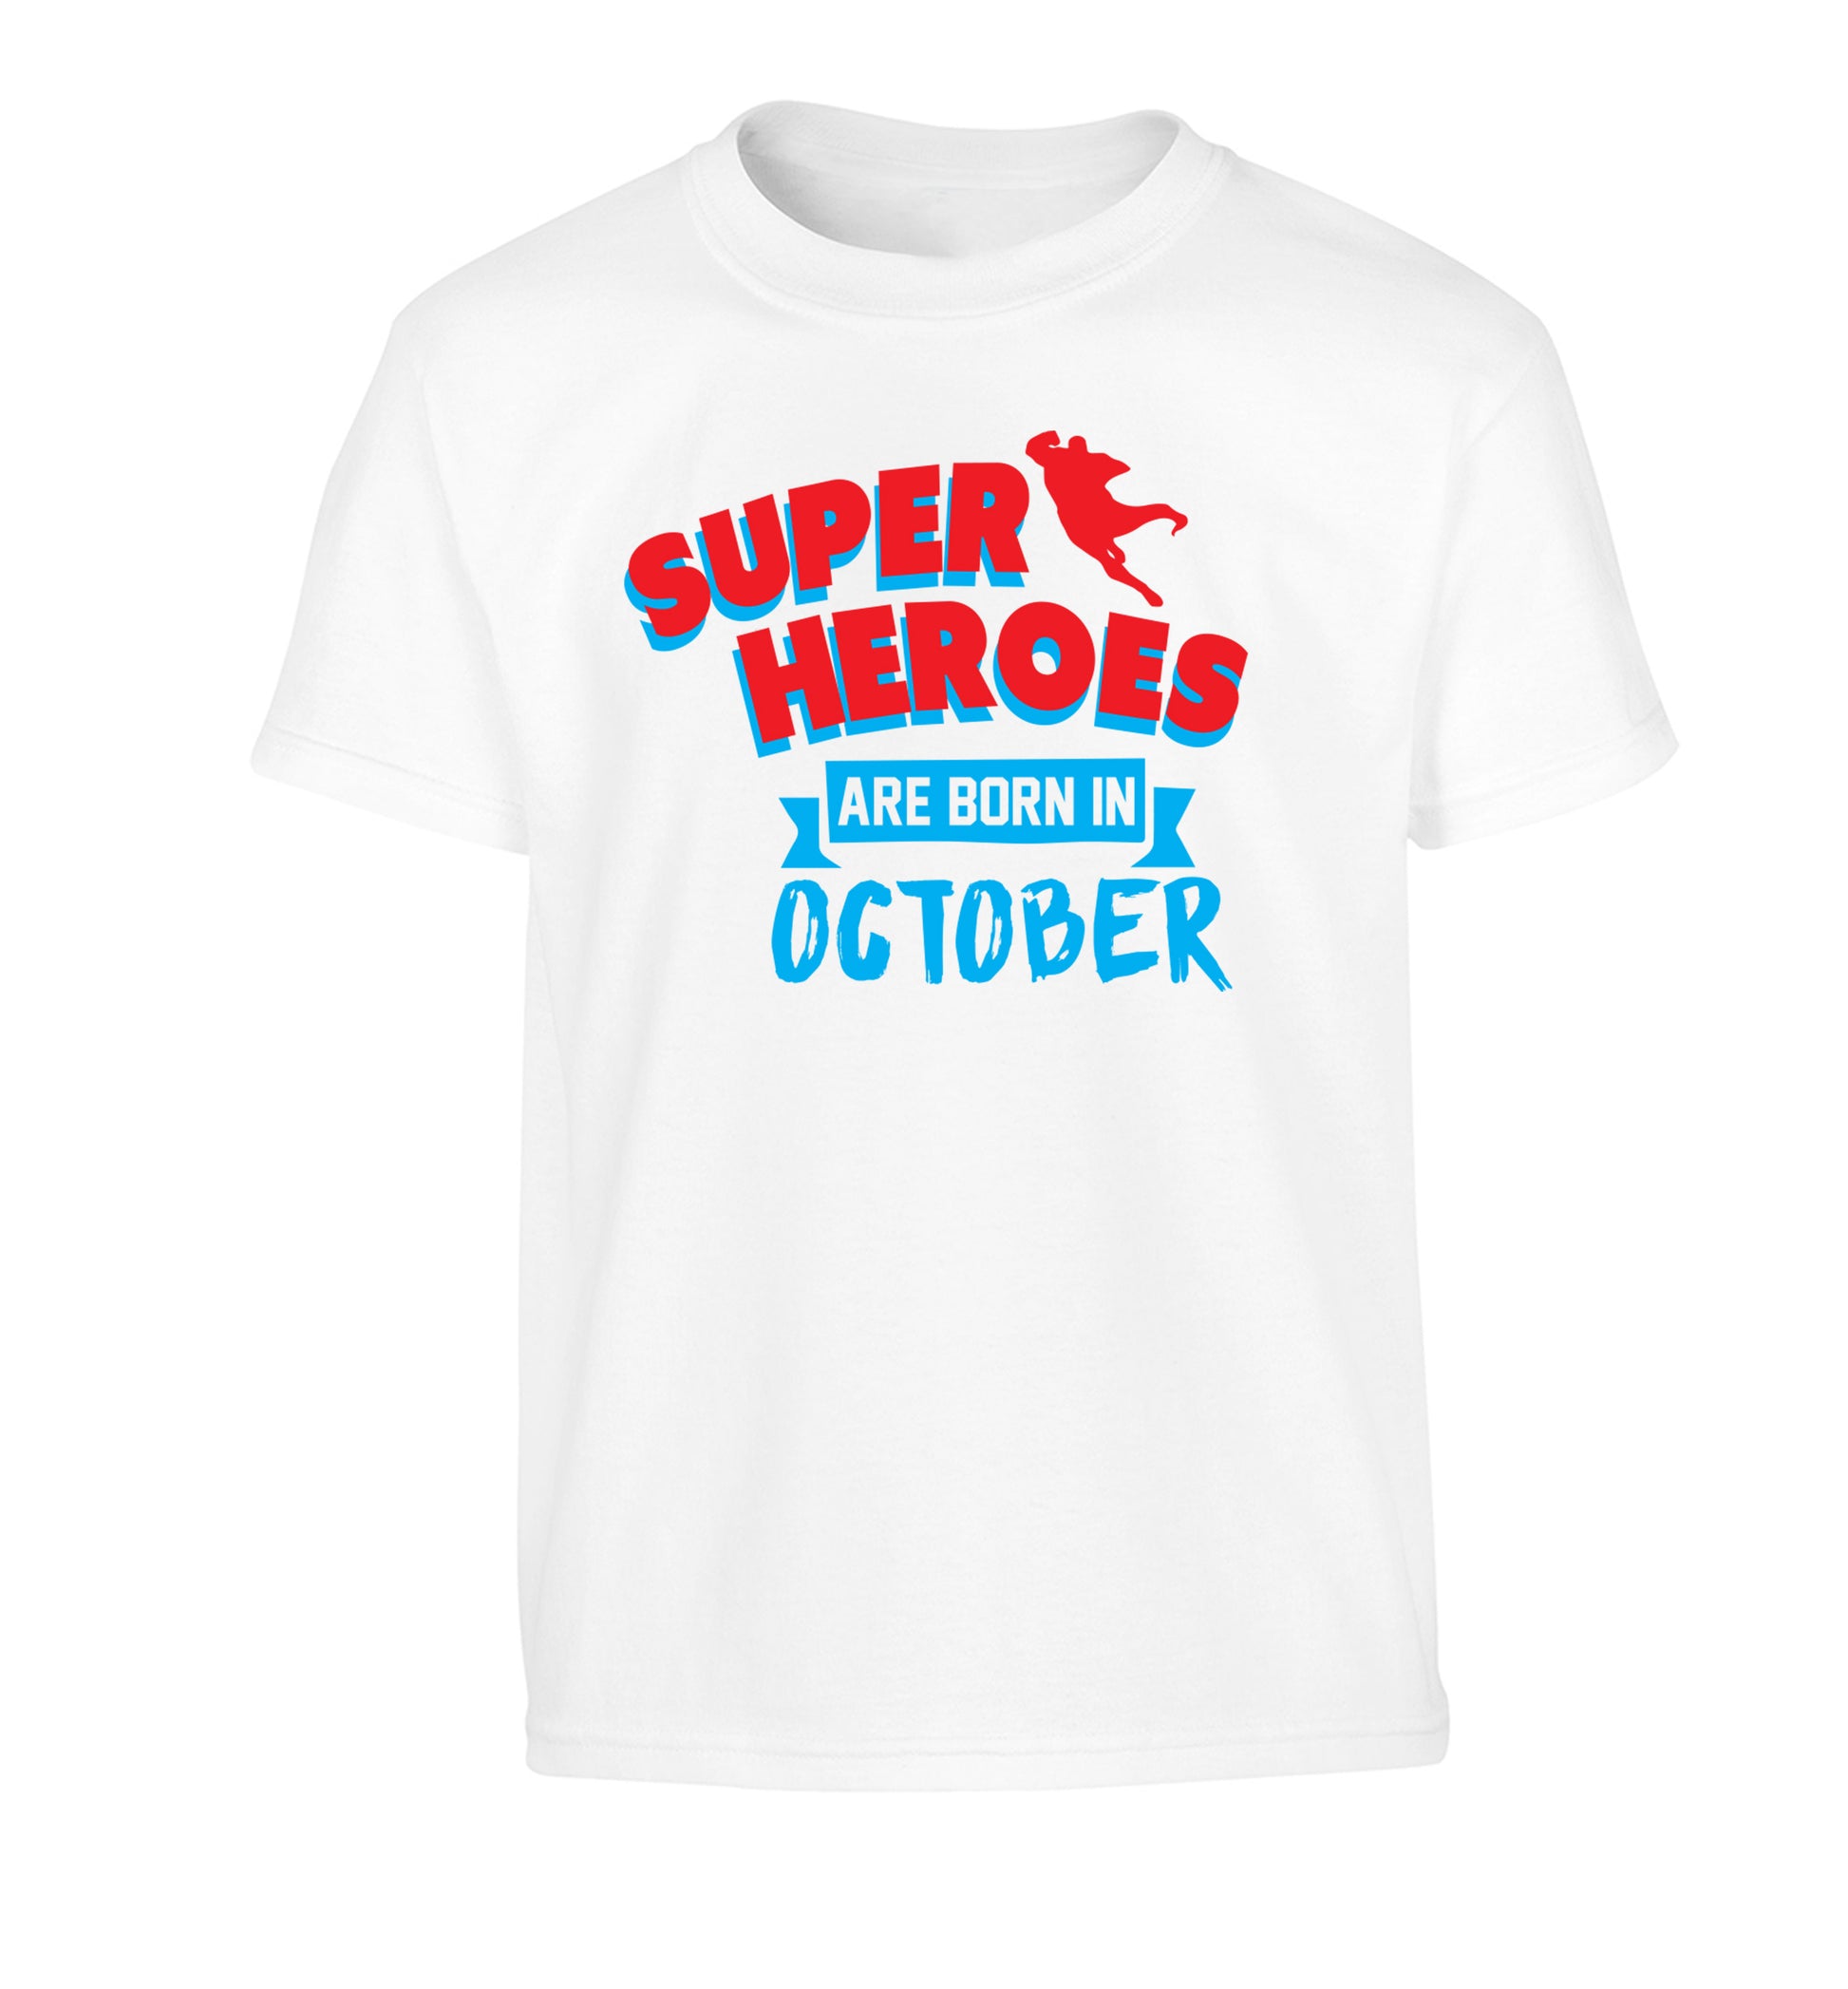 Superheroes are born in October Children's white Tshirt 12-13 Years